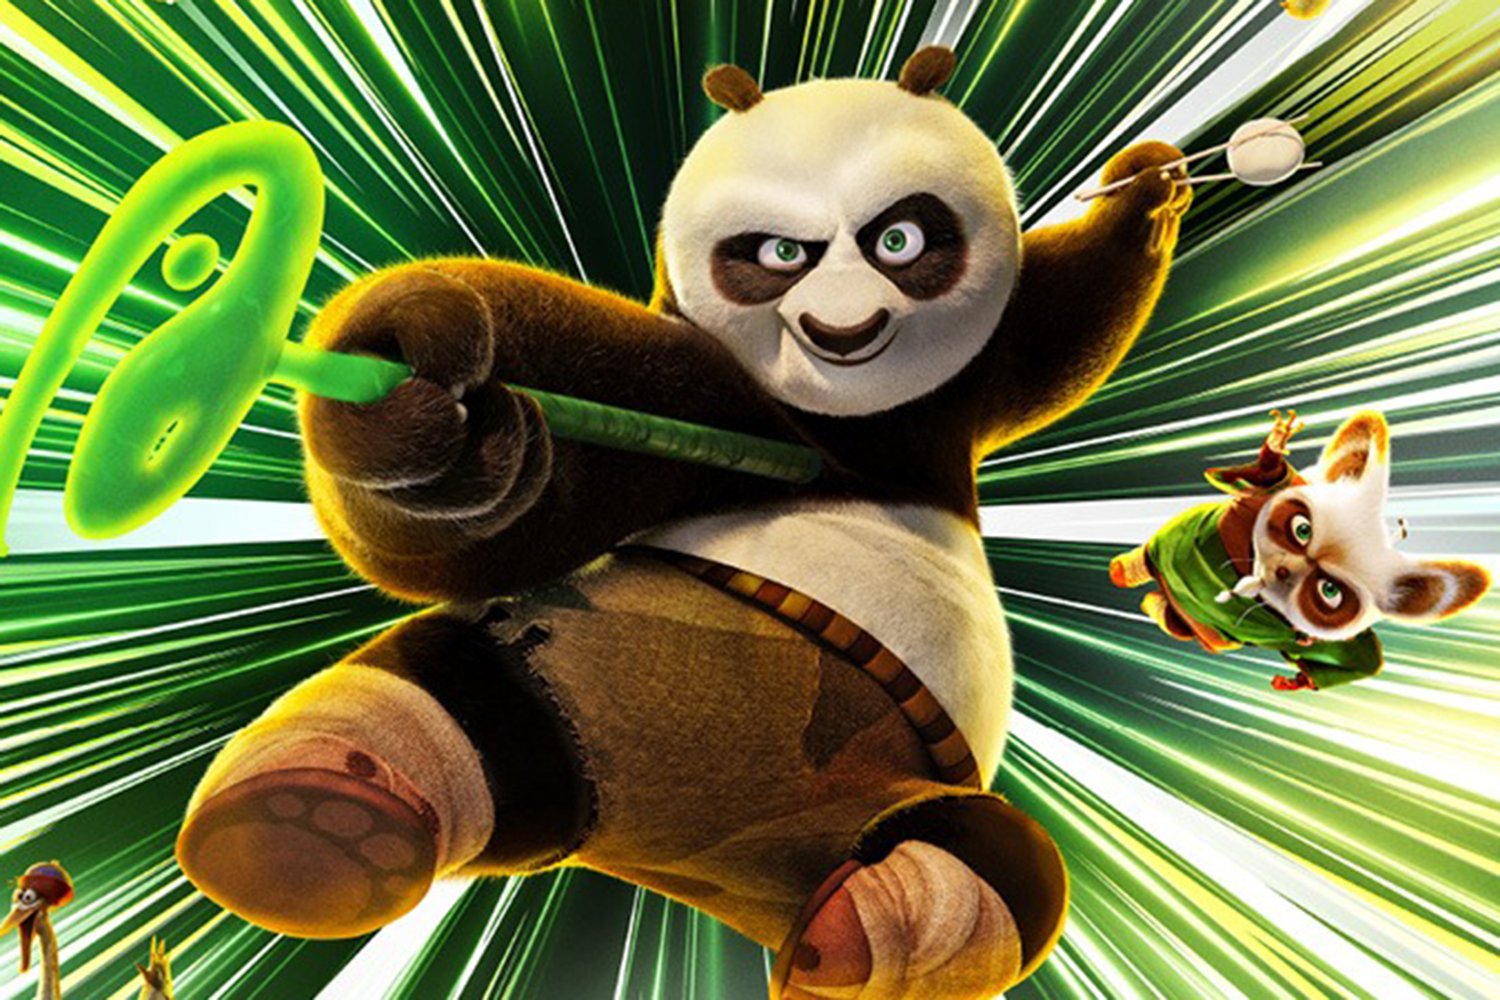 Kungfu Panda 4 2024, Kungfu Panda 4 2024 Vietsub, Kungfu Panda 4 2024 phụ đề, Xem phim Kungfu Panda 4 2024 phụ đề, Xem Kungfu Panda 4 2024 Vietsub, Kungfu Panda 4 2024 phụ đề Vietsub, Kungfu Panda 4 Full phụ đề Vietsub, Kungfu Panda 4 Full Vietsub, Kungfu Panda 4 Vietsub, Kungfu Panda 4 Phụ đề, Xem hoạt hình Kungfu Panda 4 Vietsub, Xem hoạt hình Kungfu Panda 4 thuyết minh, Kungfu Panda 4 thuyết minh, Kungfu Panda 4 lồng tiếng, Phim hoạt hình, Kungfu Panda 4 Full Movie Free Online Streaming Full HD, Watch Movie Kungfu Panda 4 Full Movie Free Online Streaming Full HD, Watch Movie Kungfu Panda 4 Full Movie Free Online Streaming, Kungfu Panda 4 streaming online free, Watch Kungfu Panda 4 full free online, See movie Kungfu Panda 4, Kungfu Panda 4 streaming online free, Kungfu Panda 4 full free online movie, See movie Kungfu Panda 4 full free online, Kungfu Panda 4 Full HD free online, Kungfu Panda 4, Watch Kungfu Panda 4 free streaming, Animation Movies